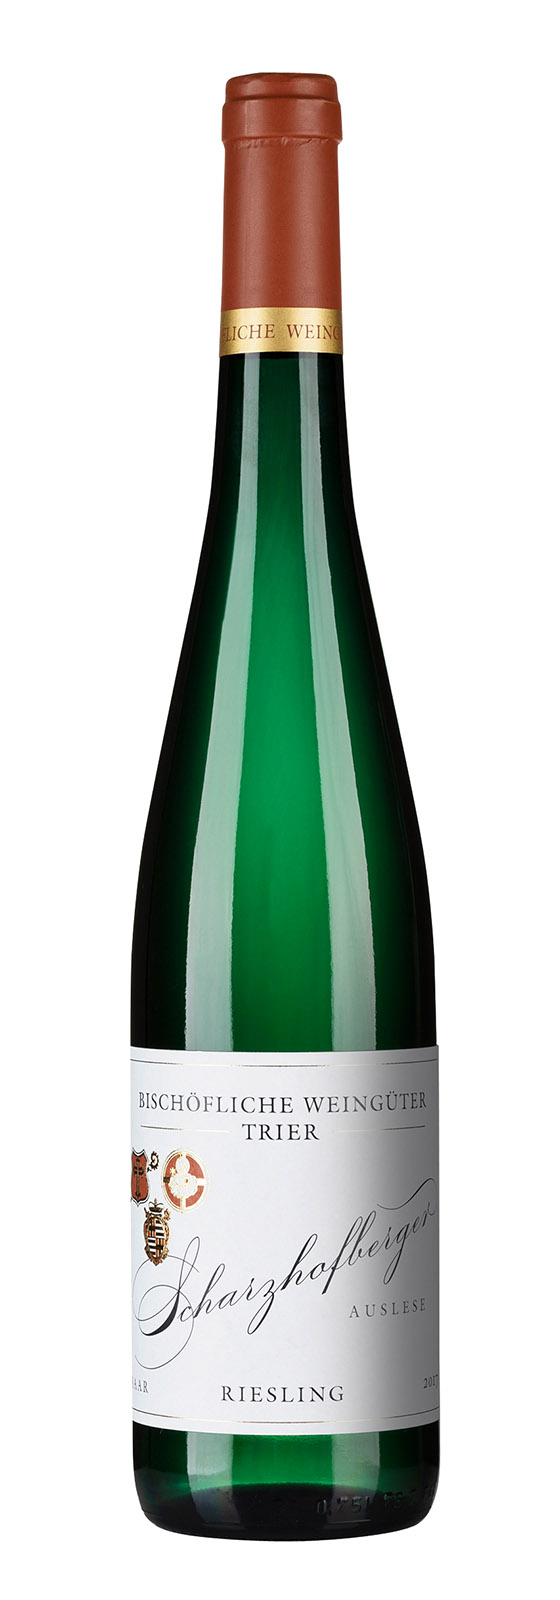 Scharzhofberger Riesling Auslese 2017